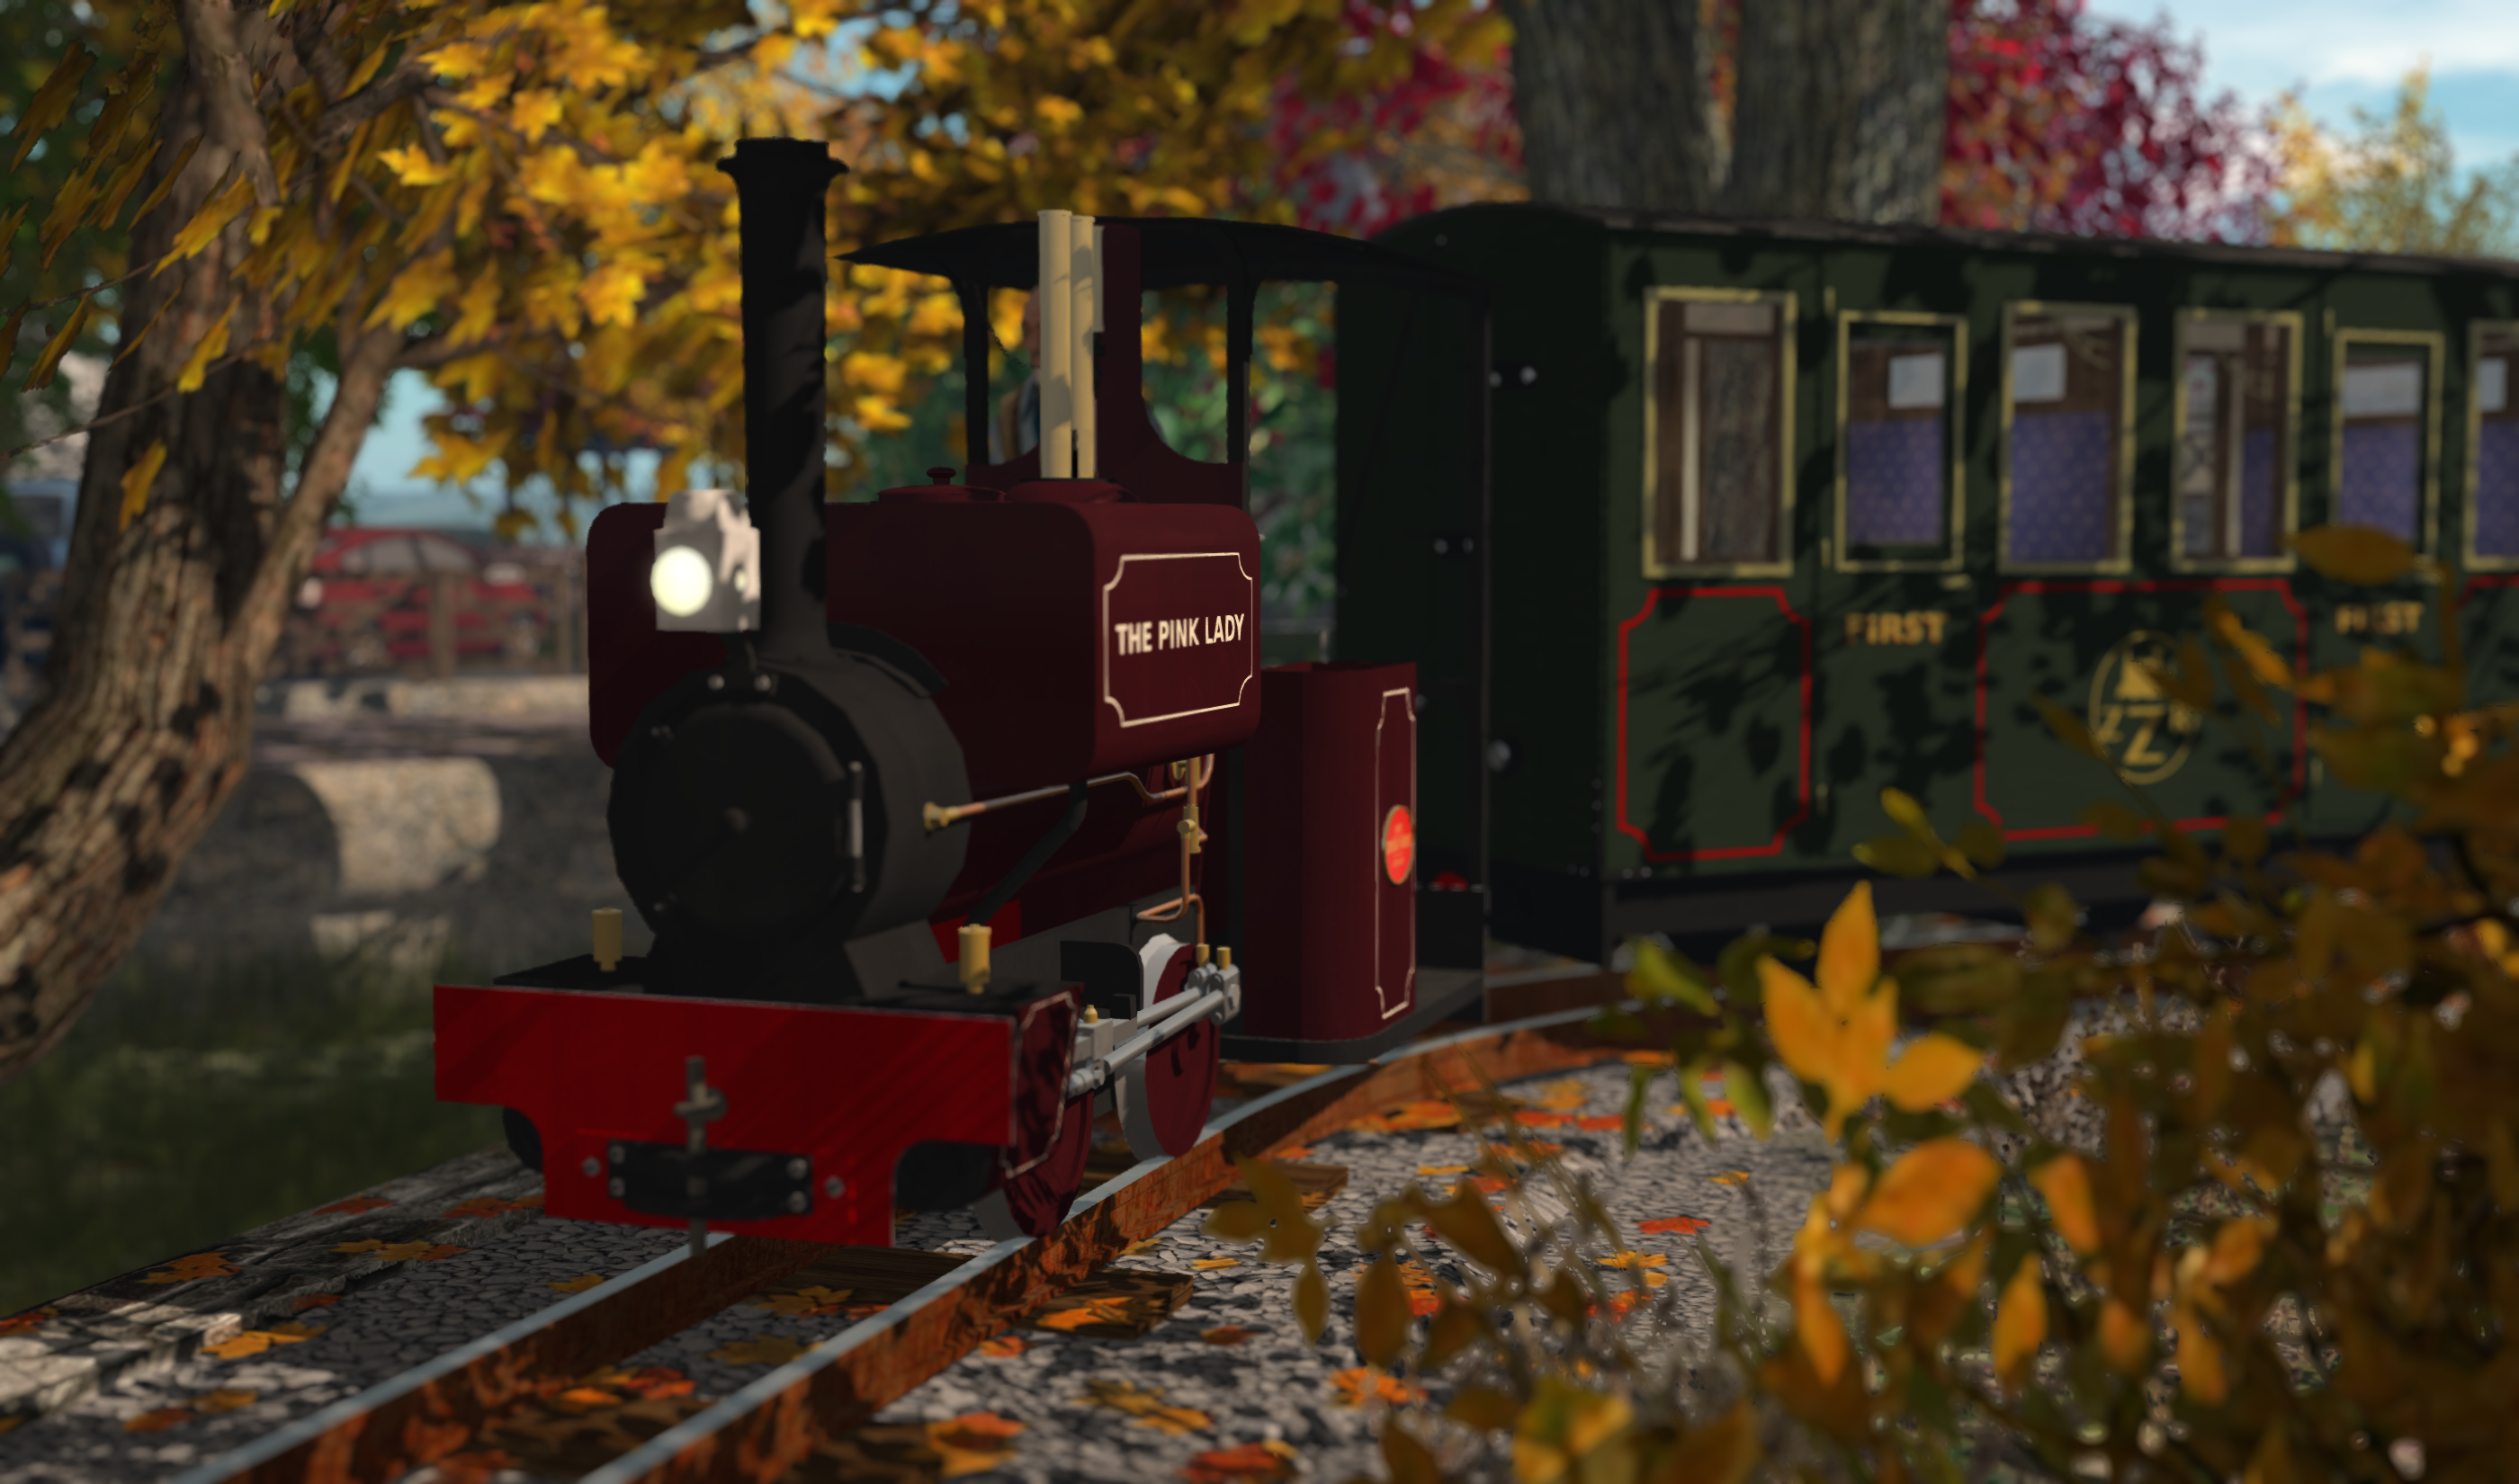 The Pink Lady is now hauling the passenger train till the 17th of October!